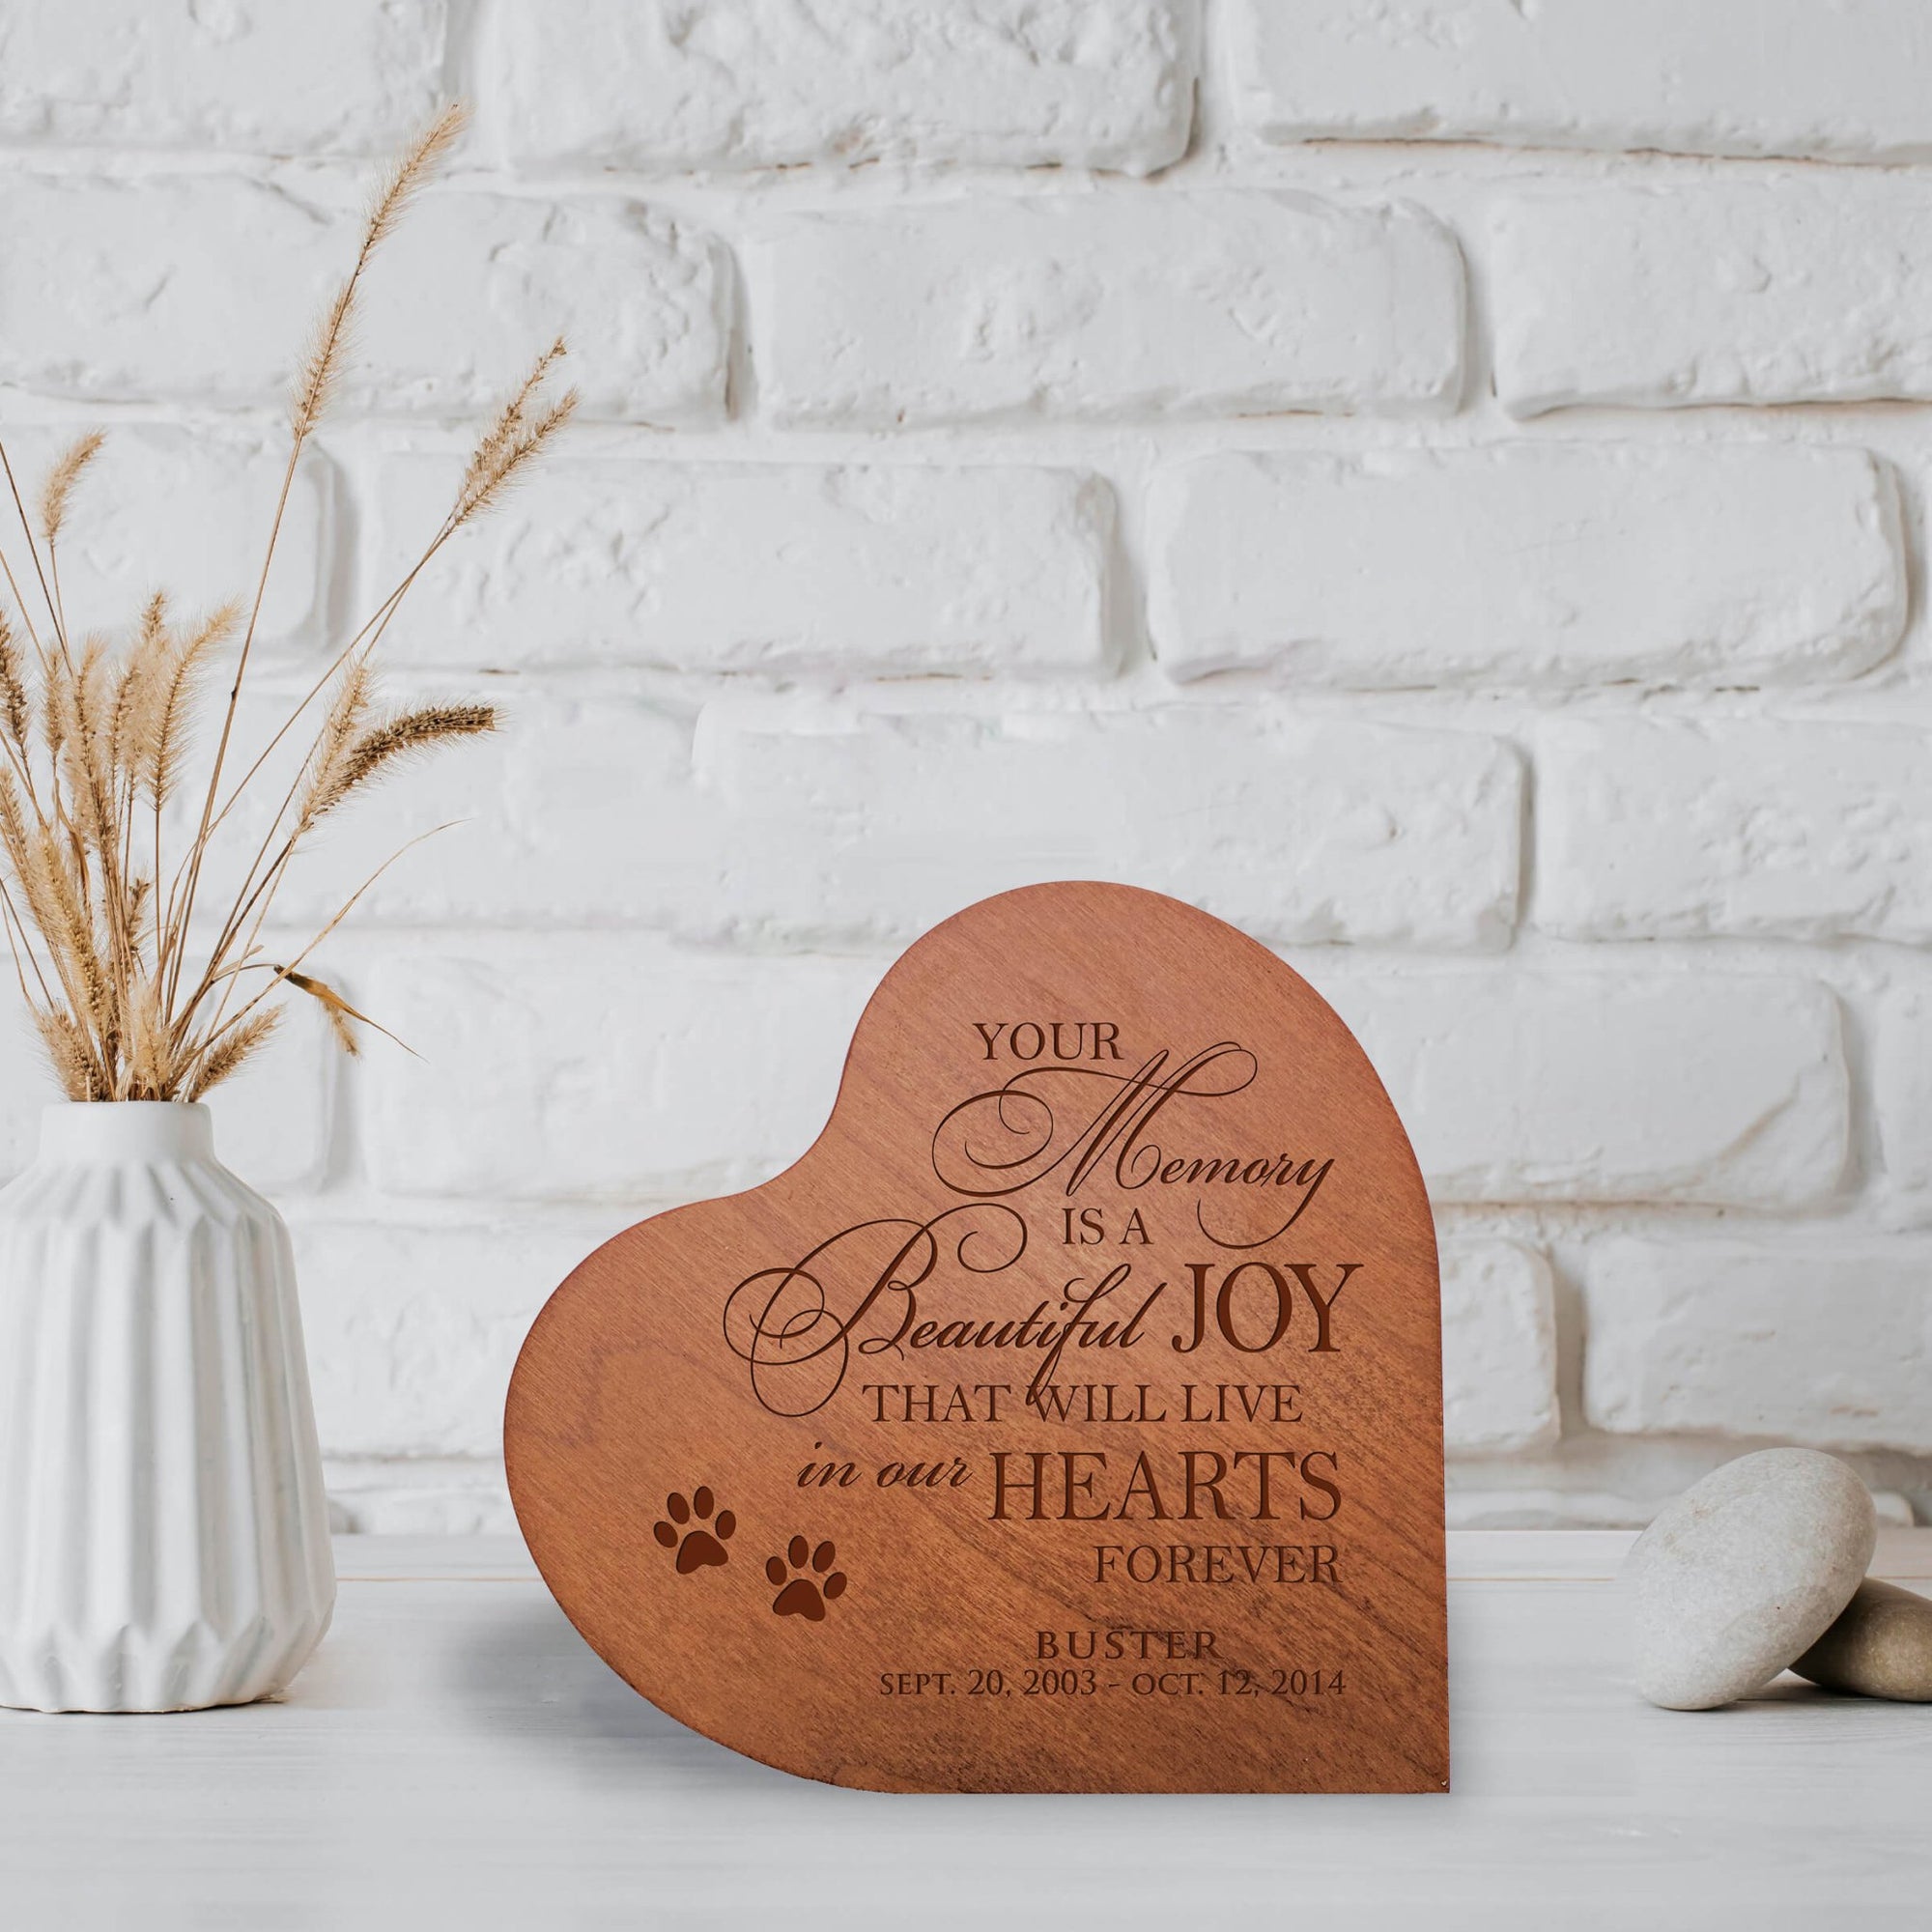 Personalized Small Heart Cremation Urn Keepsake For Pet Ashes - Your Memory Is A Beautiful Joy - LifeSong Milestones